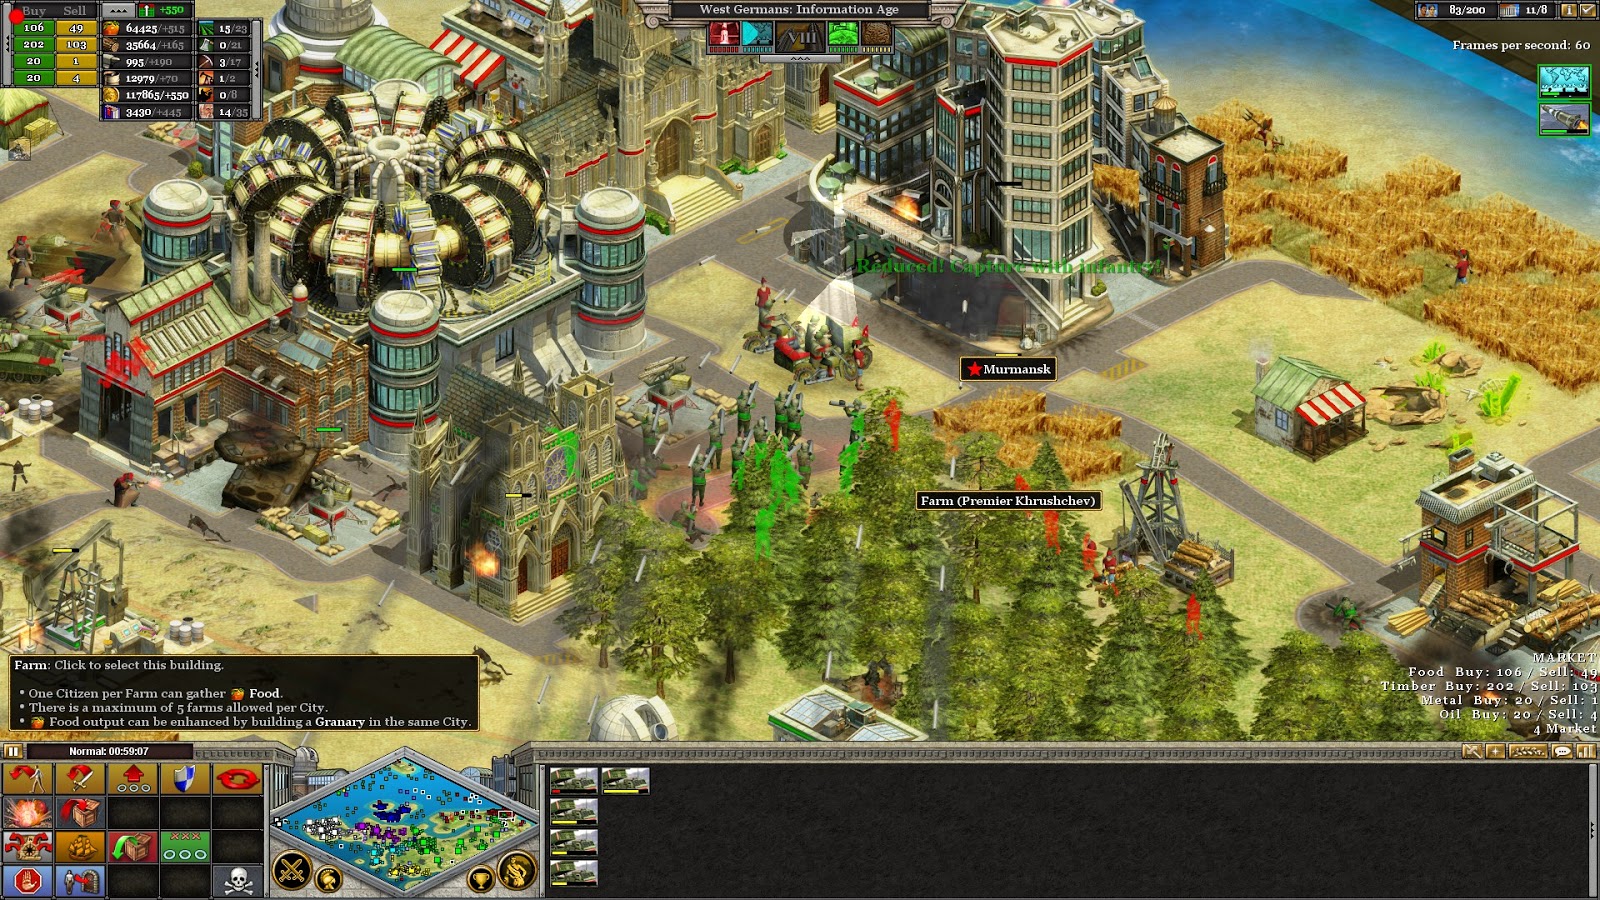 rise of nations kickass torrent